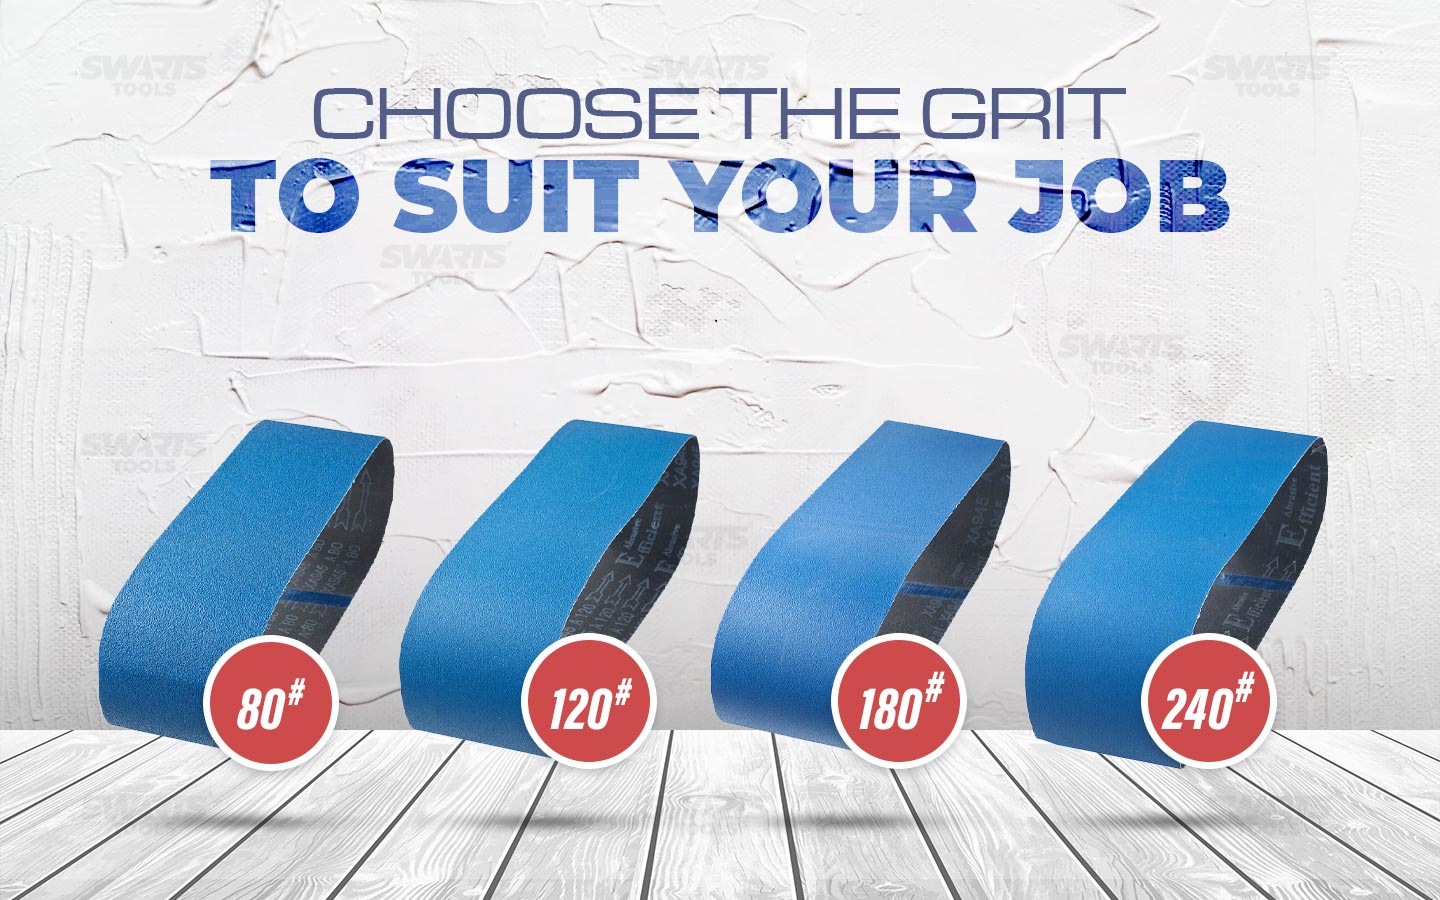 Choose the grit to suit your job